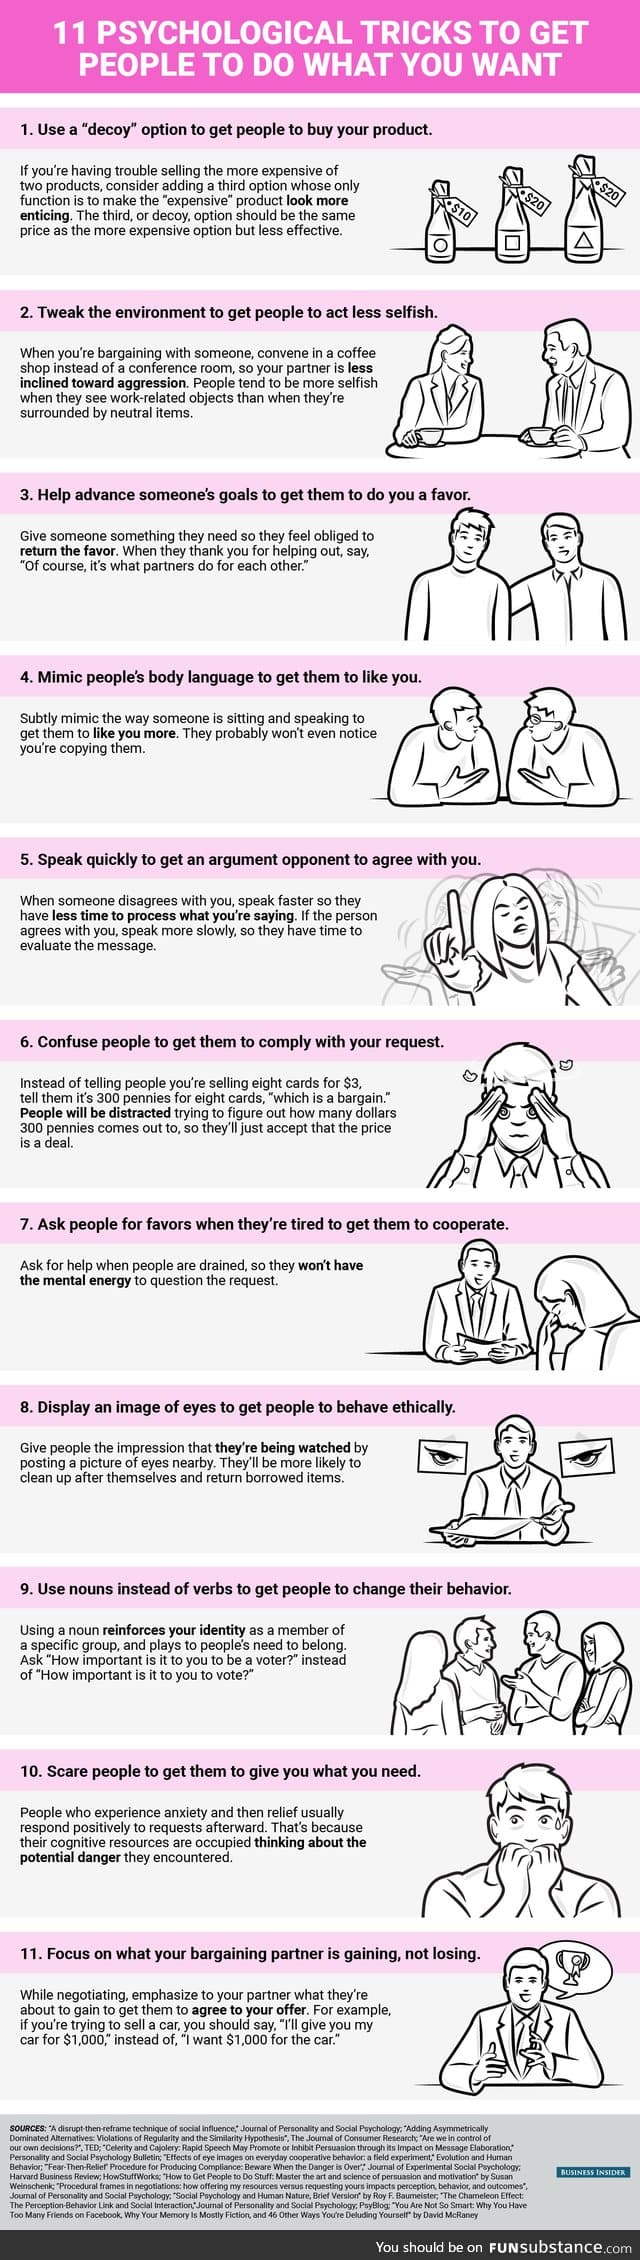 11 incredible psychological tricks "to get people to do what you want"